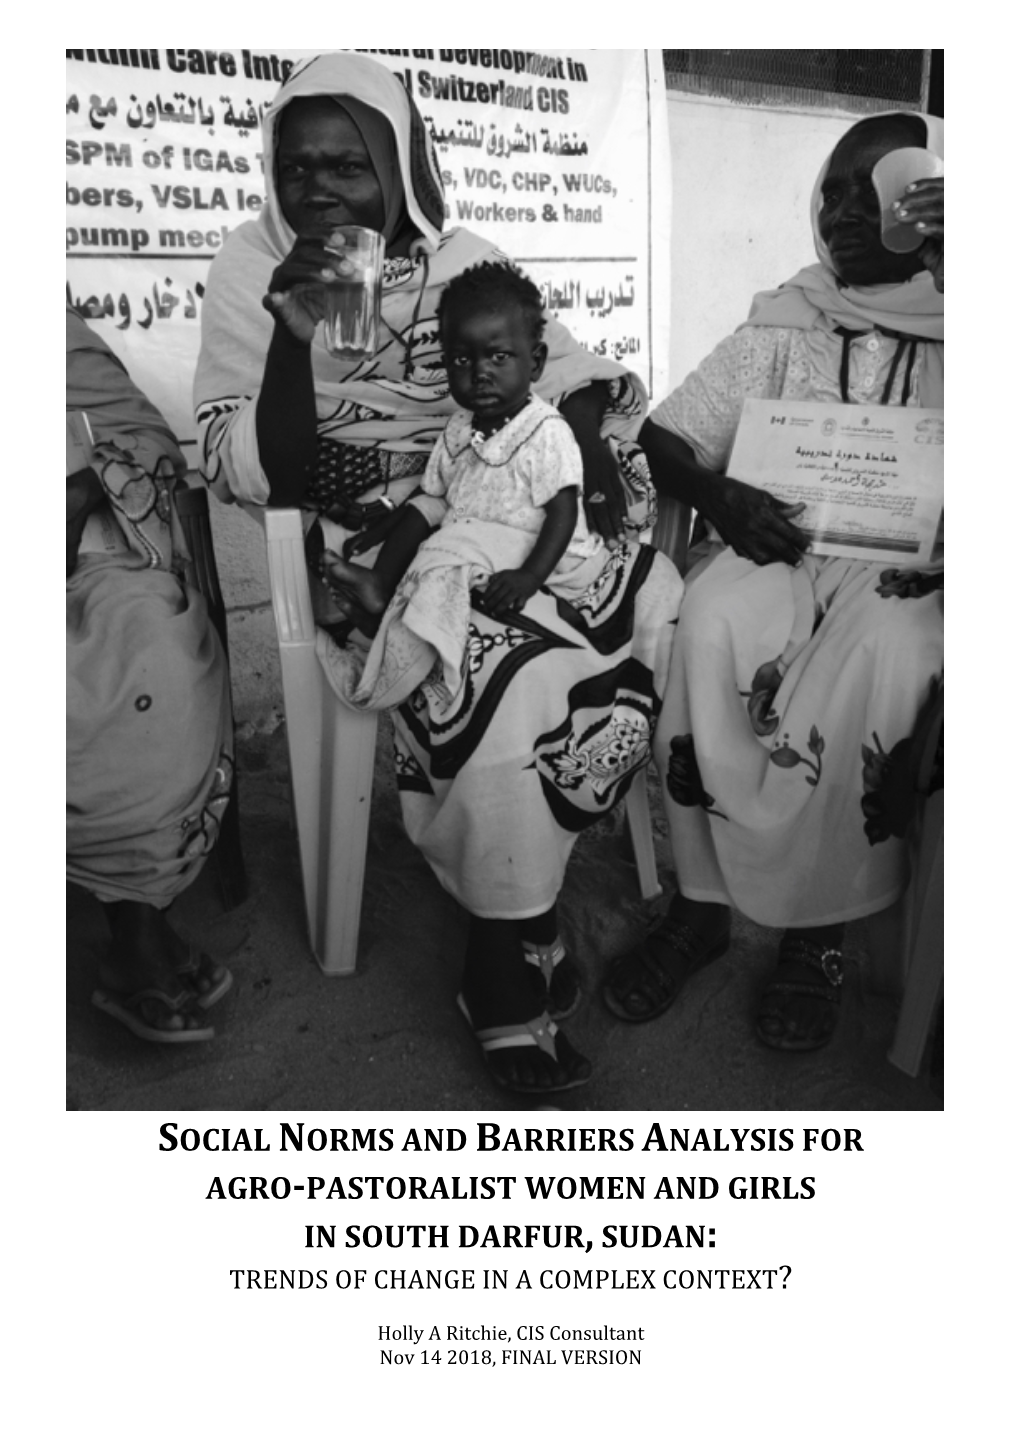 South Darfur, Sudan: Trends of Change in a Complex Context?